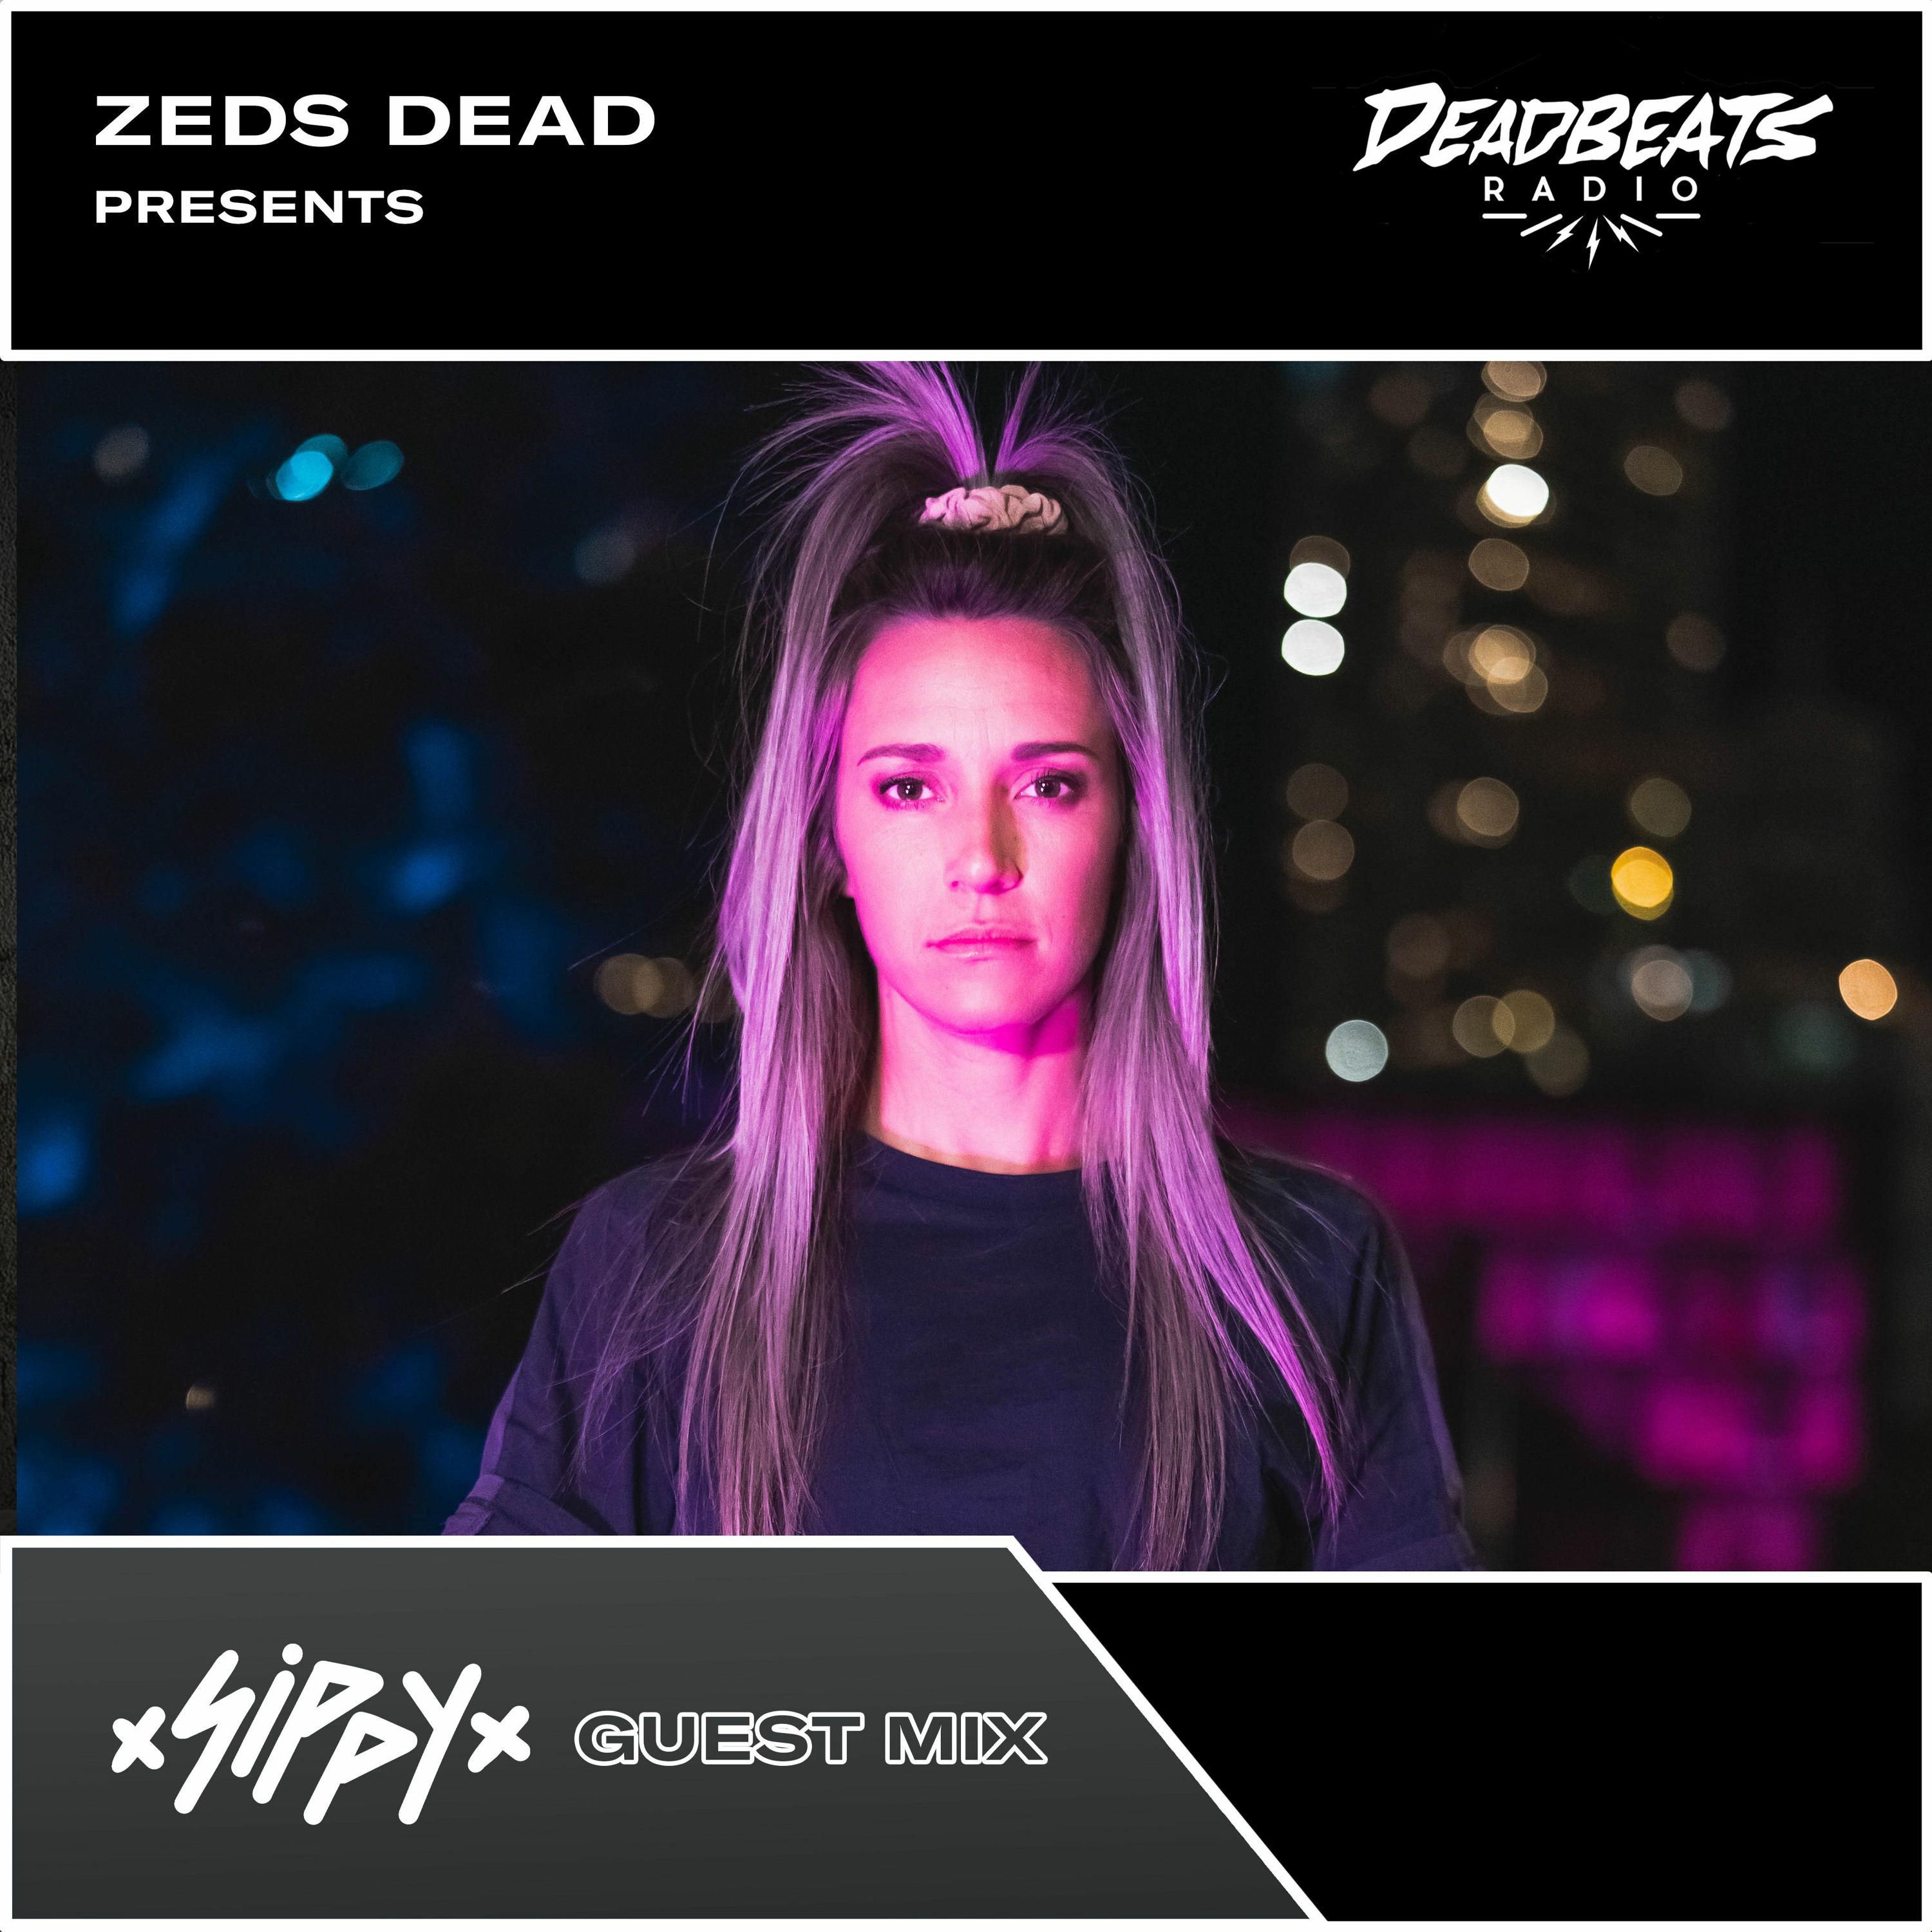 #205 Deadbeats Radio with Zeds Dead // Sippy Guestmix